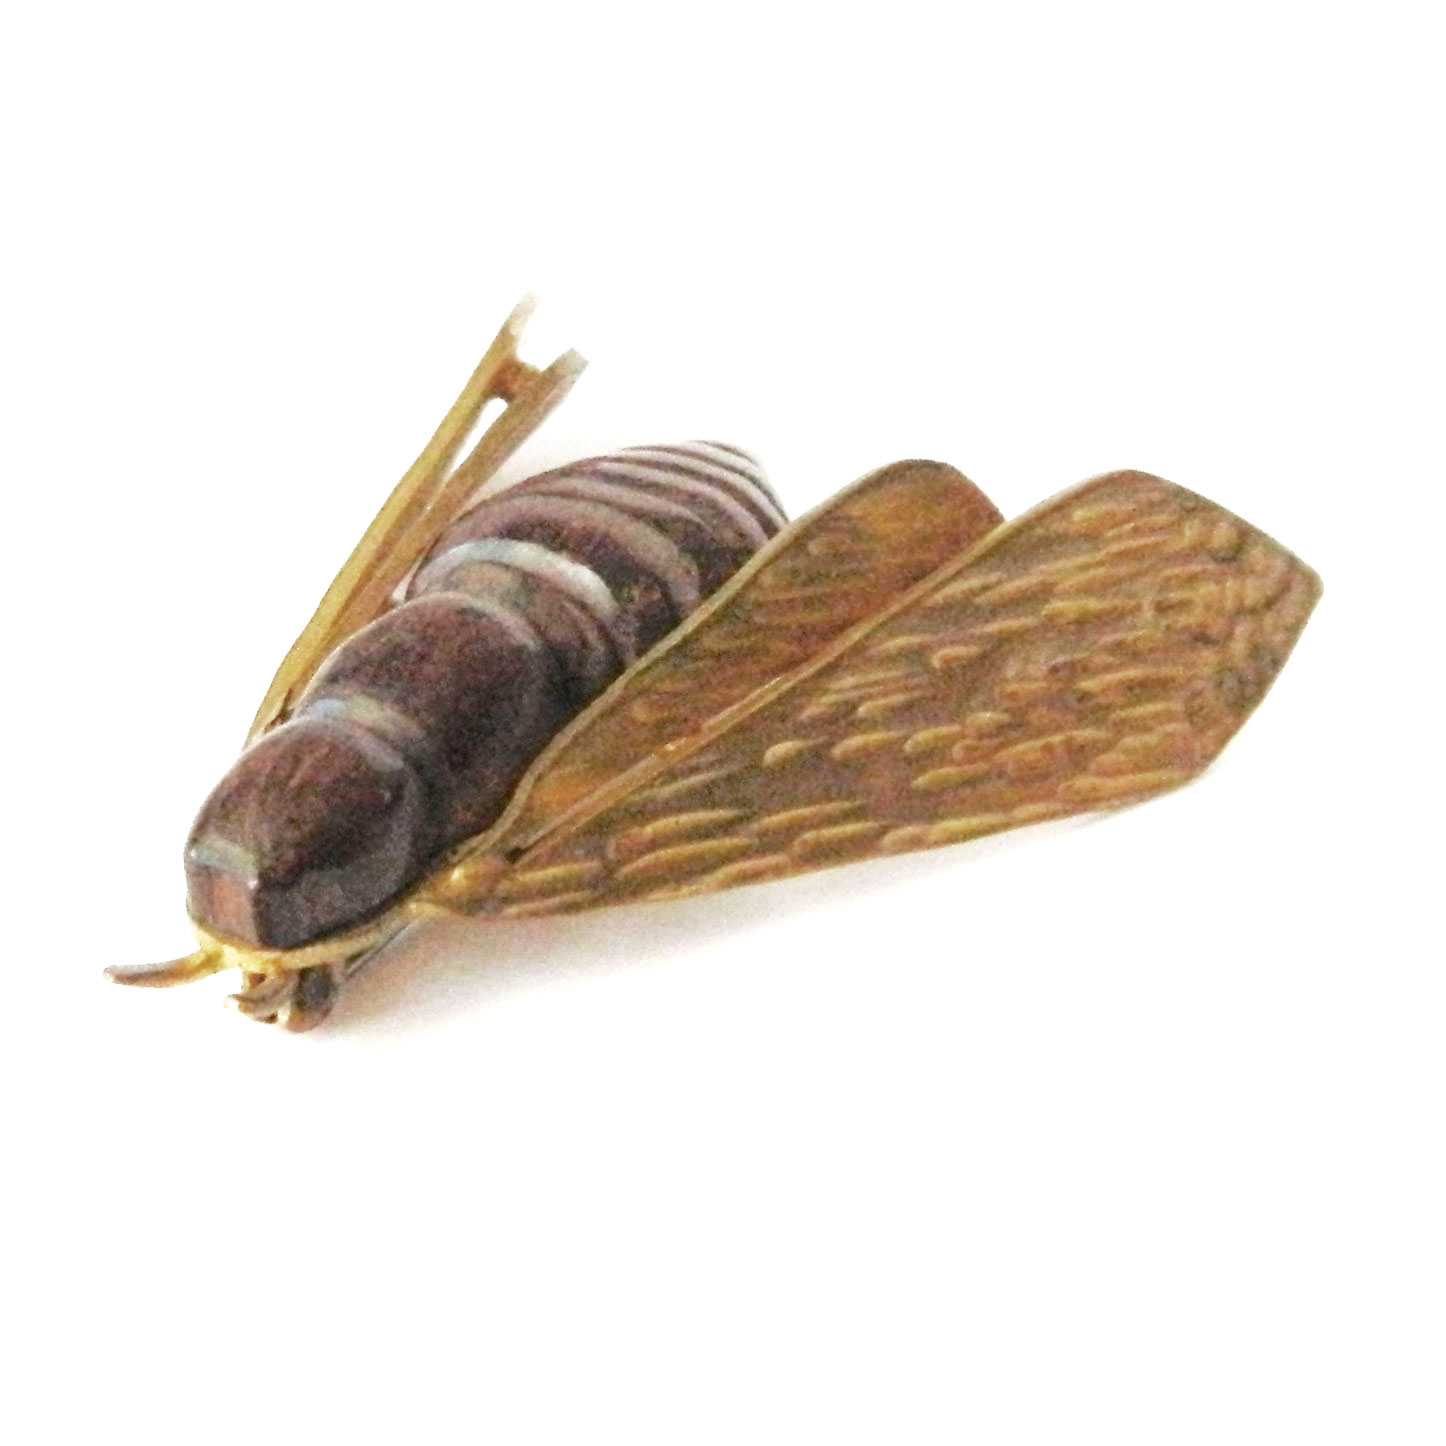 Rosewood cicada insect brooch